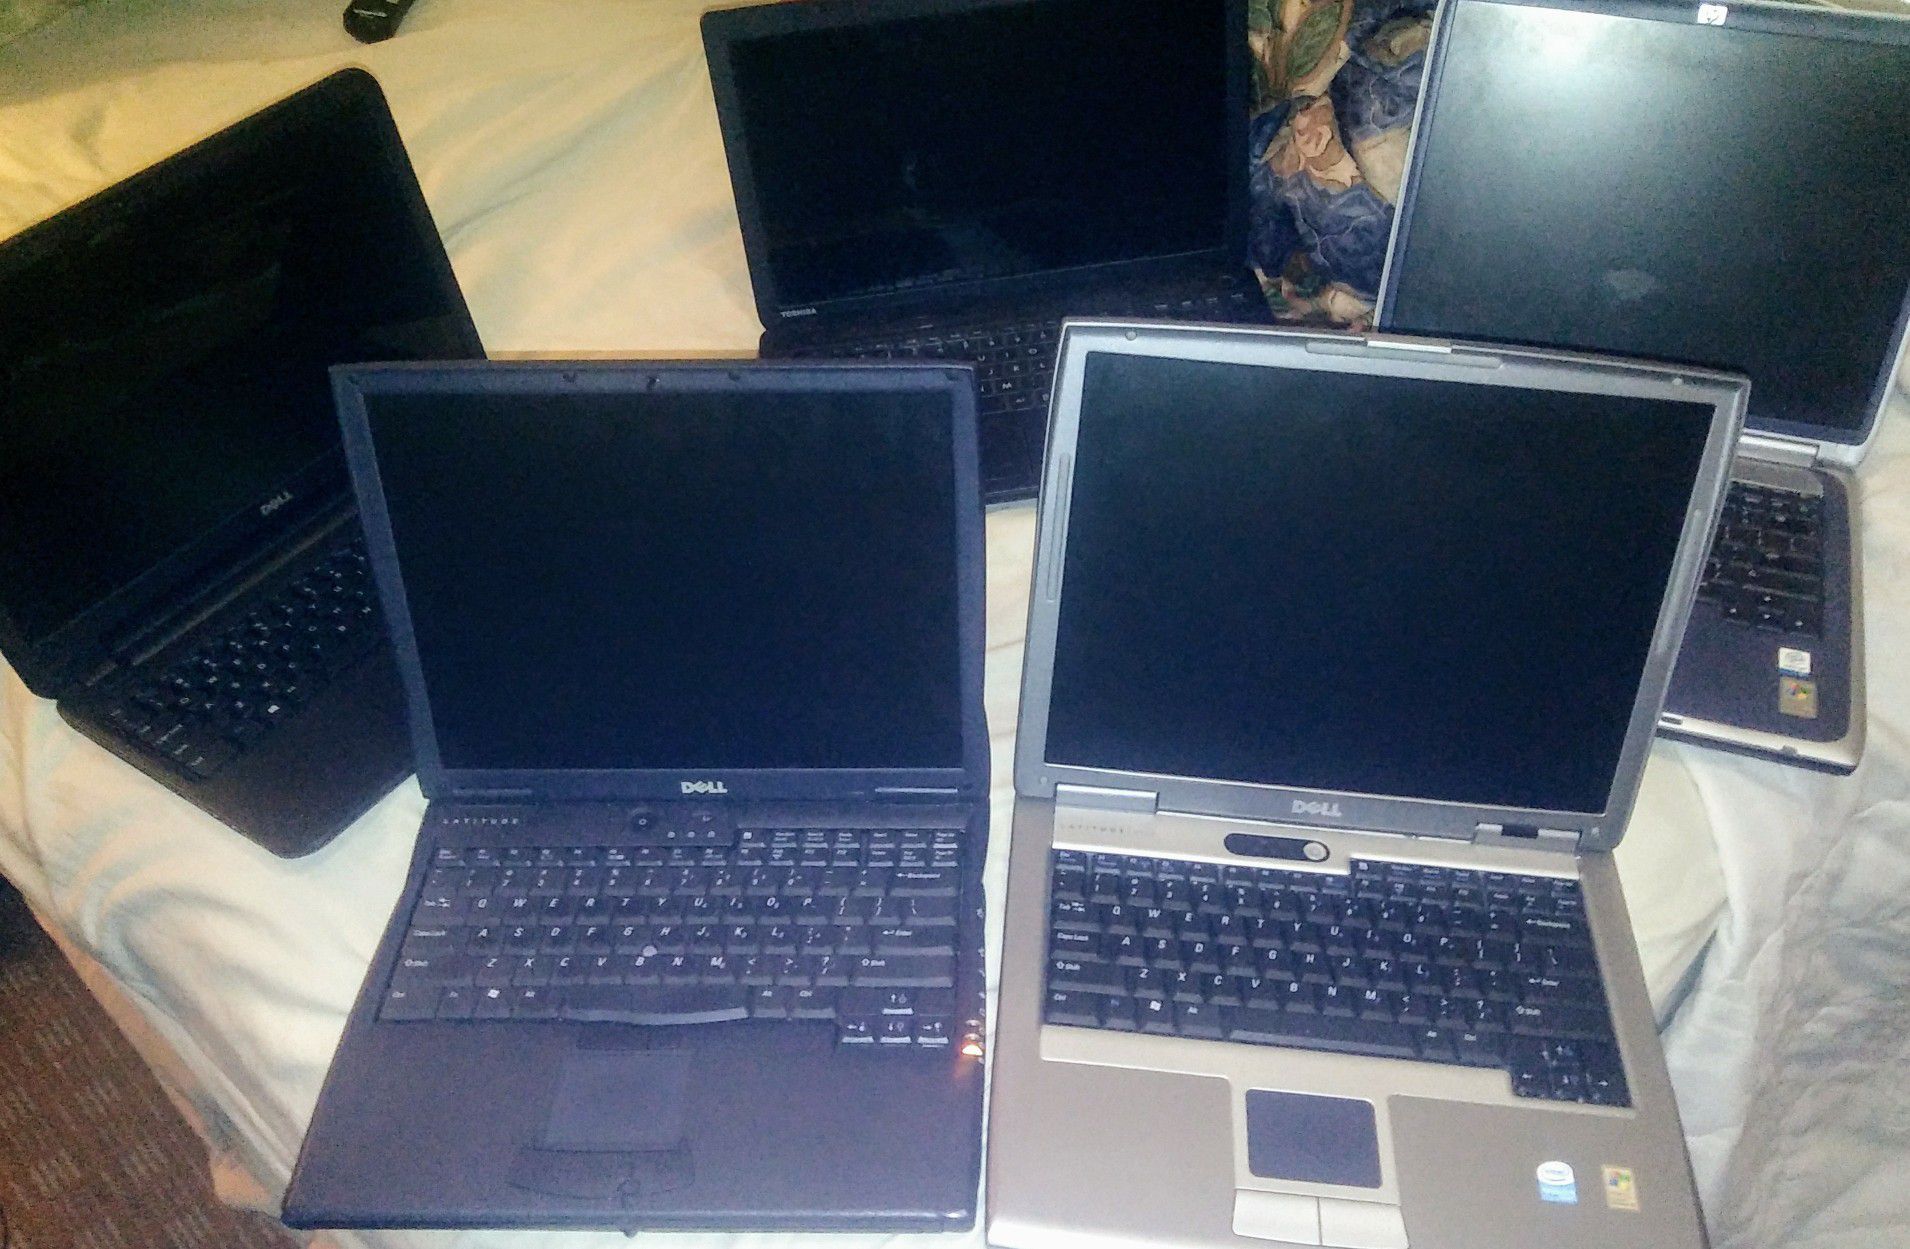 Dell Latitude PP01L, Toshiba Satellite C55-A, Dell Inspiron 15, HP Pavilion ze4900, and and older Dell Inspiron all for one low price!